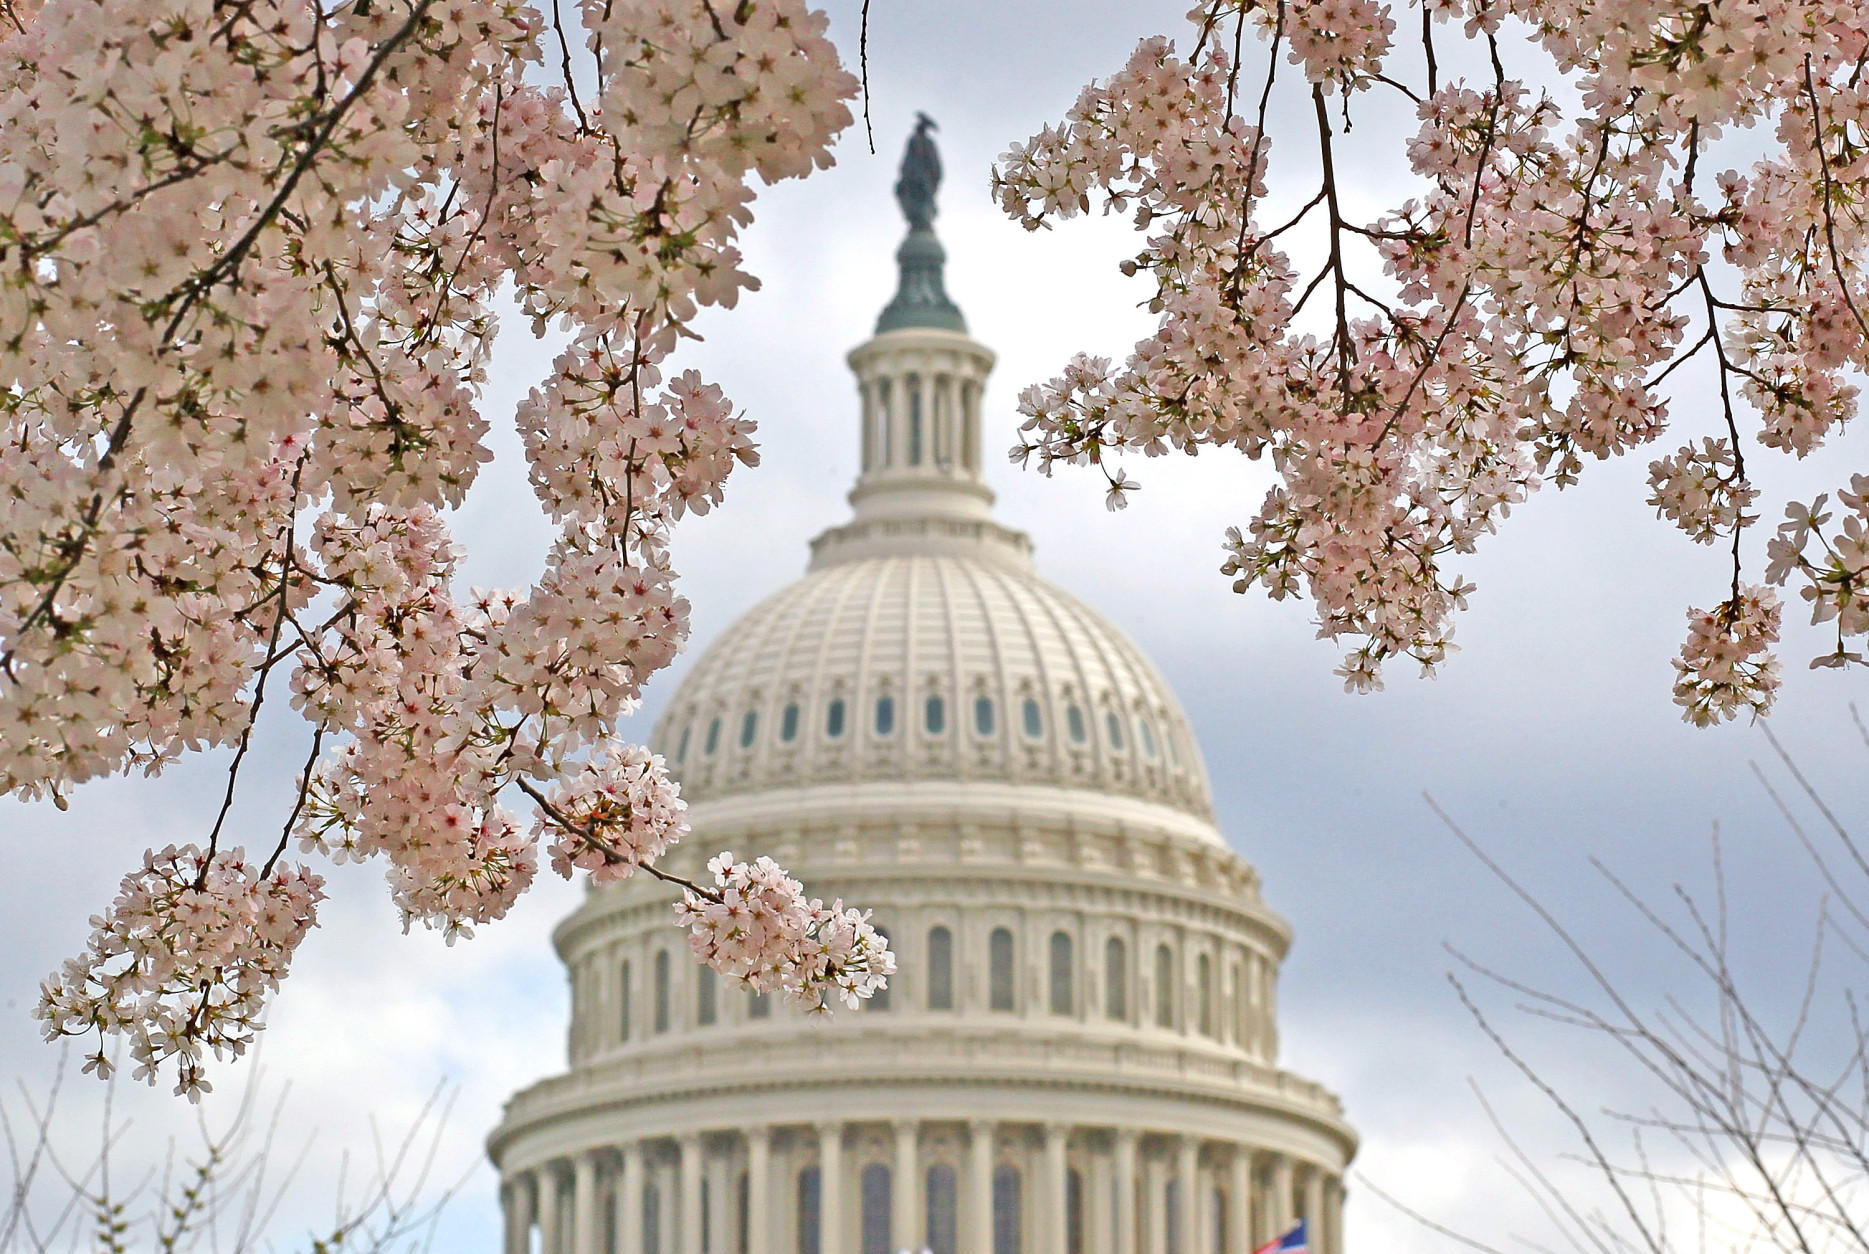 WASHINGTON, DC - MARCH 19:  A cherry tree is in full bloom in front of the U.S. Capitol on March 19, 2012 in Washington, DC. Unseasonably warm weather has caused Washington's spring flowers and the famous cherry blossoms to bloom early.  (Photo by Mark Wilson/Getty Images)